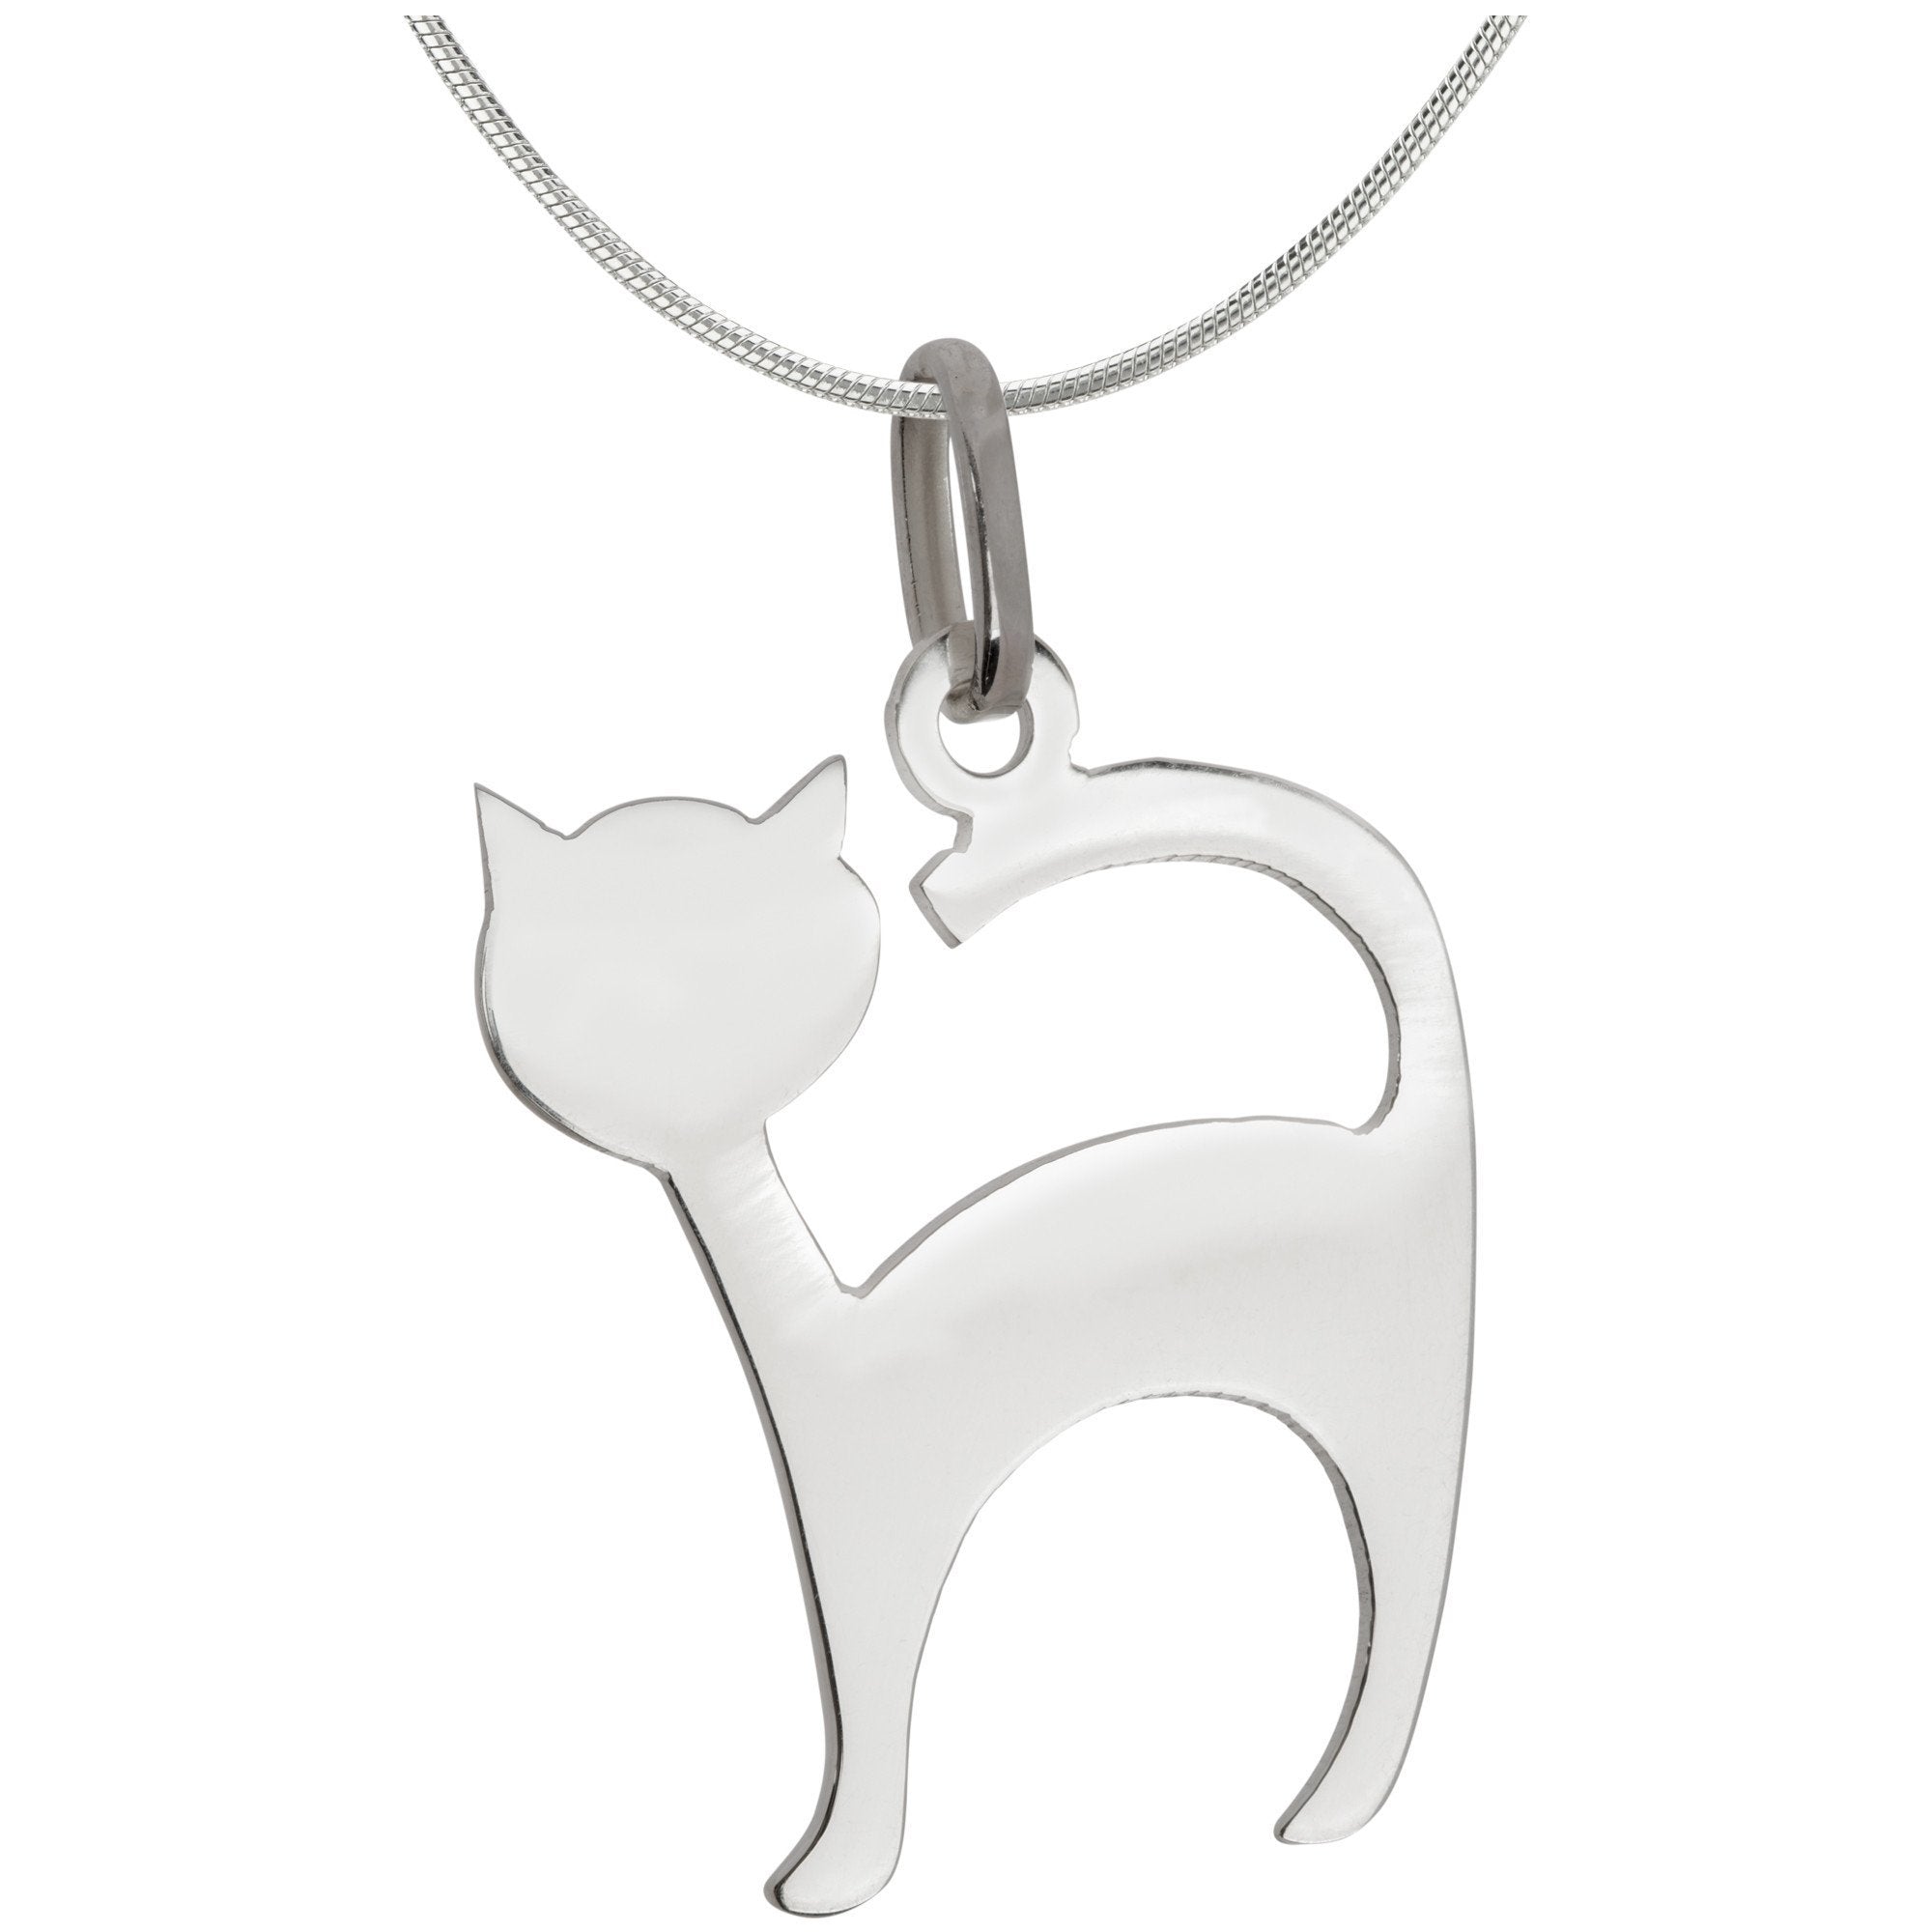 Cat Sterling Silhouette Necklace - With Sterling Cable Chain